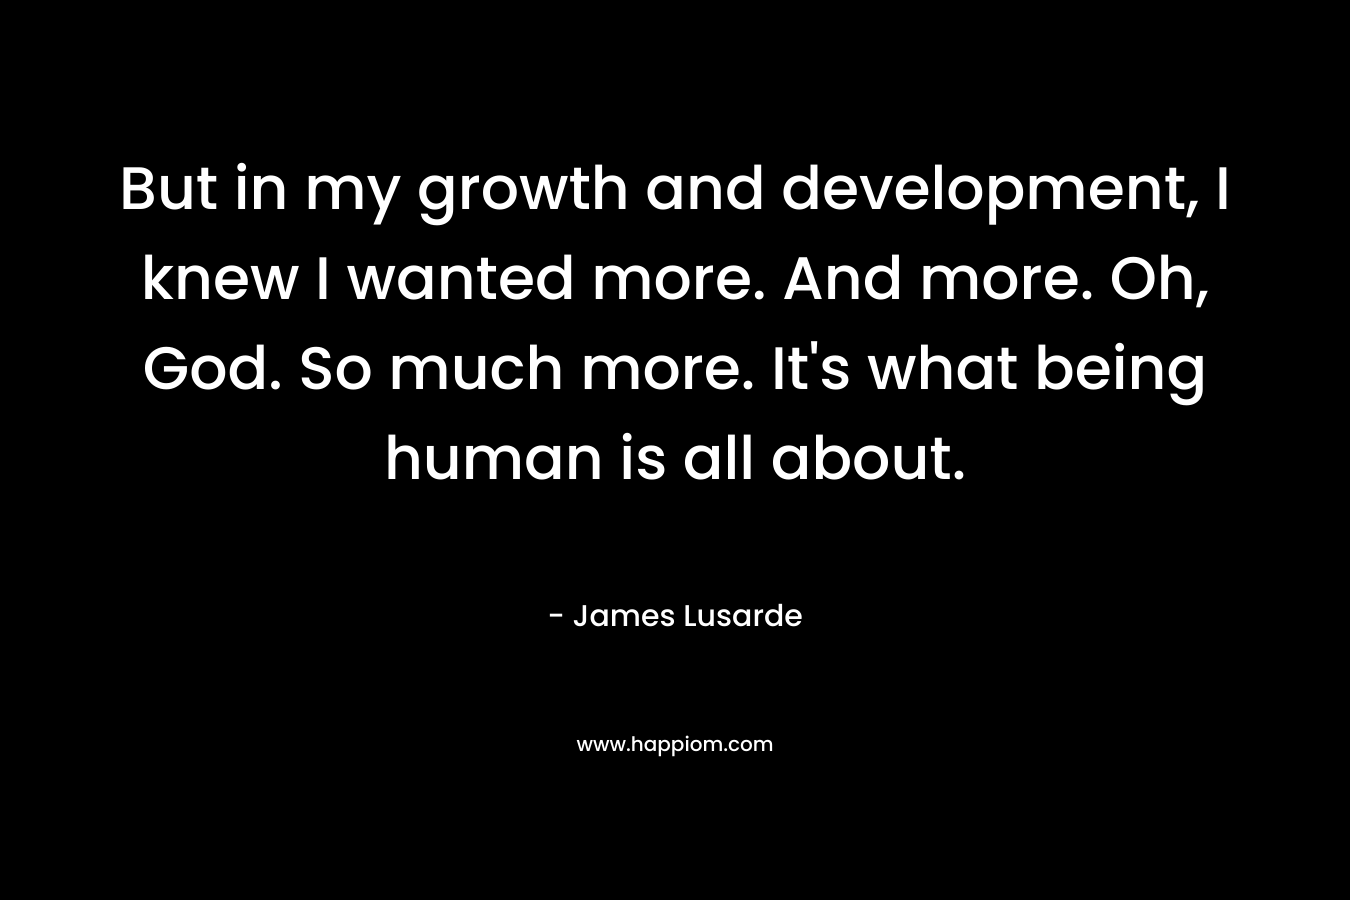 But in my growth and development, I knew I wanted more. And more. Oh, God. So much more. It's what being human is all about.